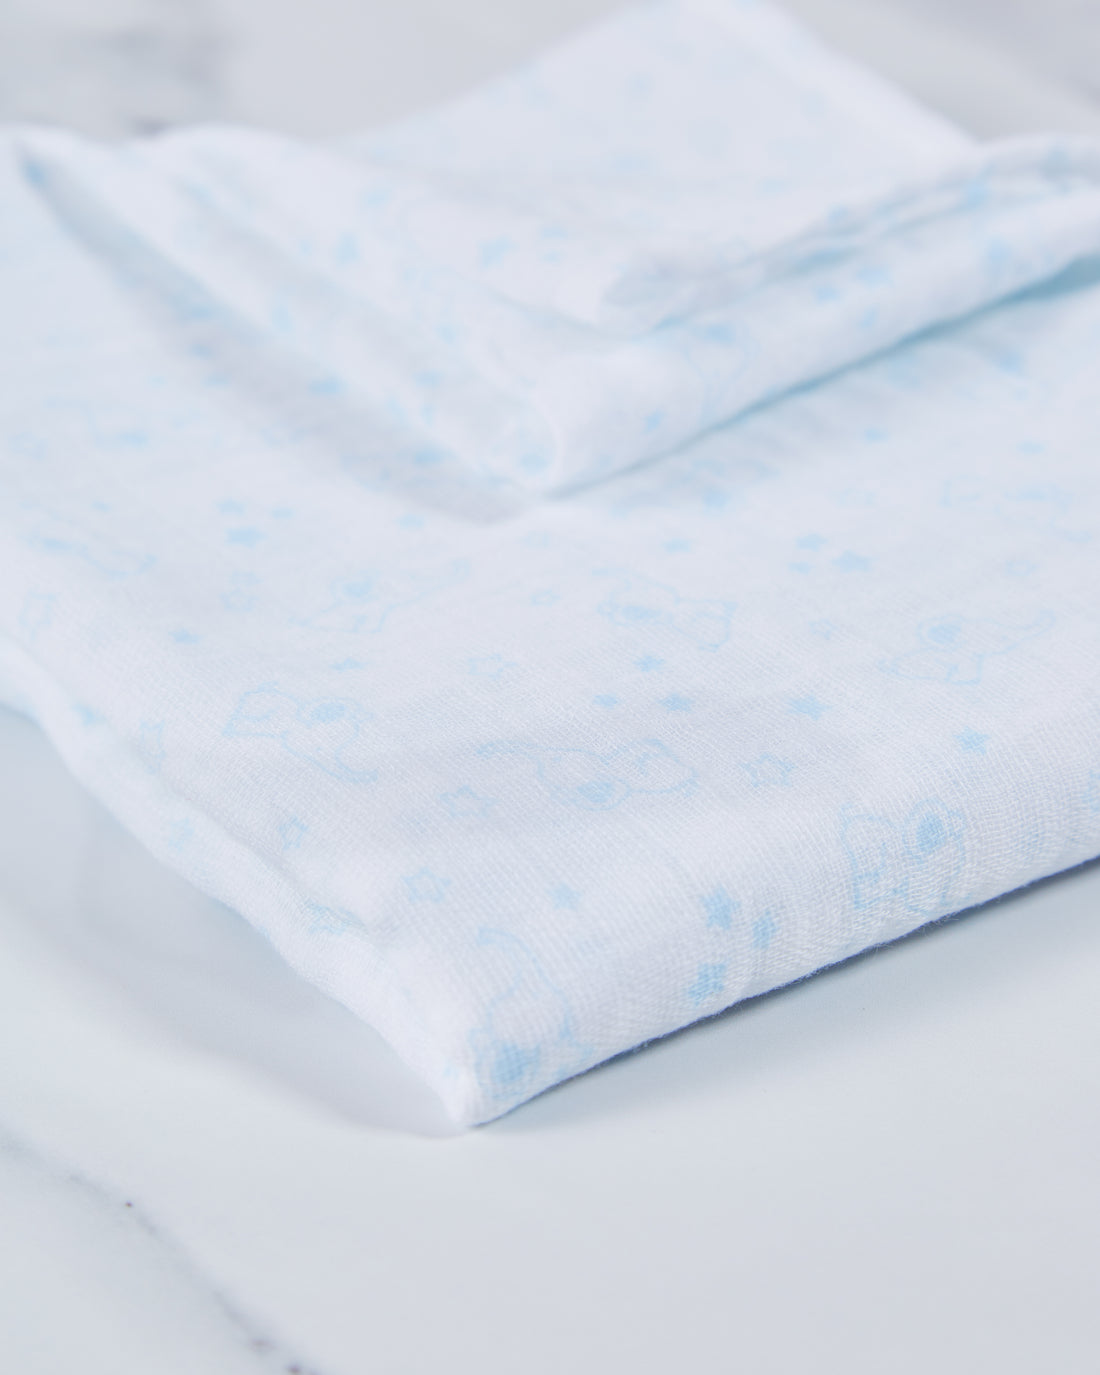 Blue cotton baby muslin with elephant print pattern. 